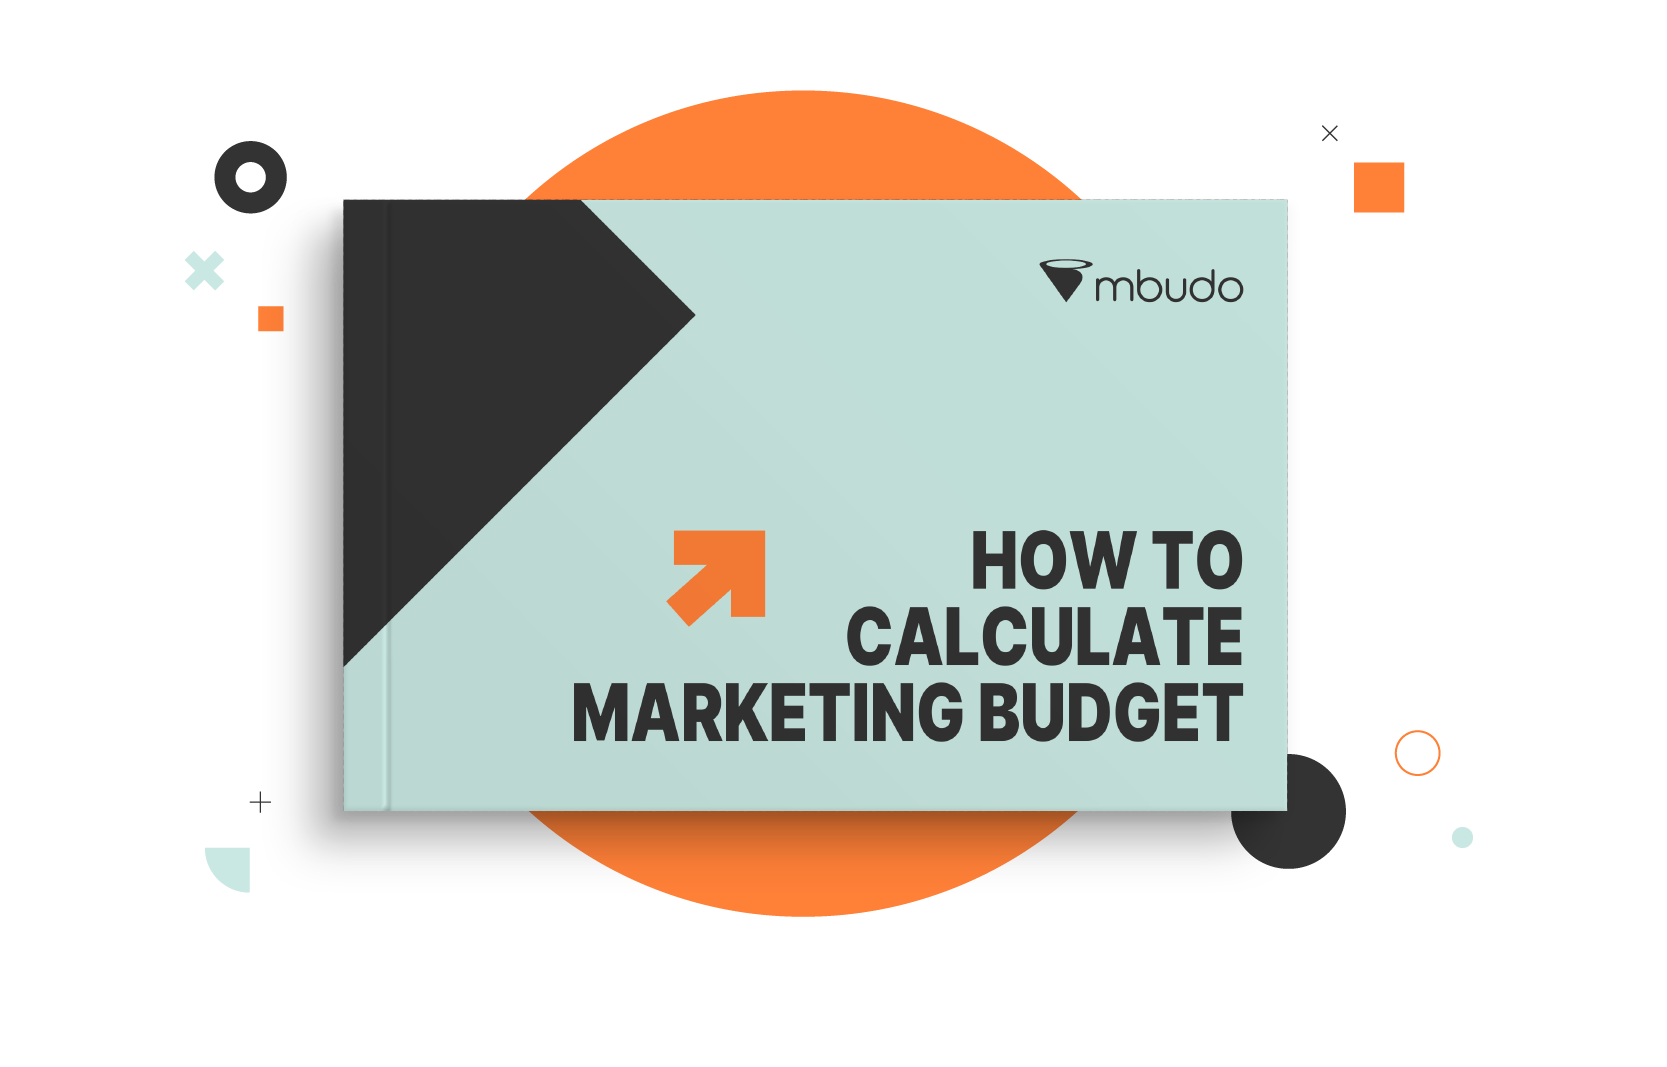 mbudo - how to calculate your marketing budget